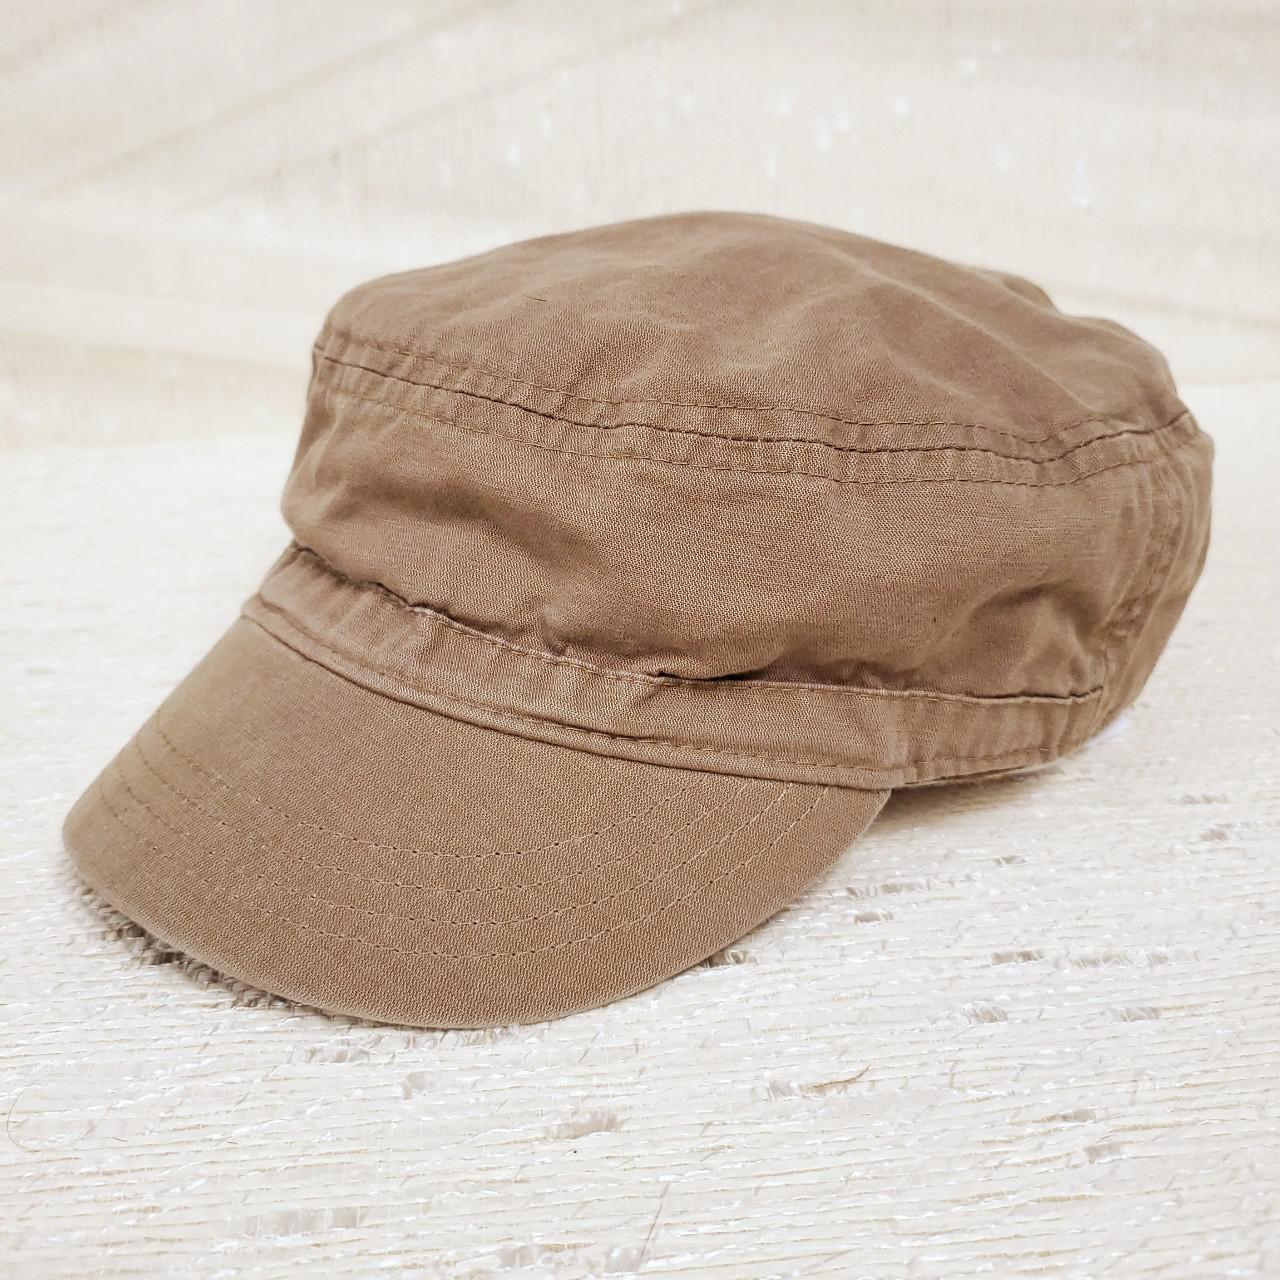 Product Image 1 - Y2k brown newsboy hat

Fabric is